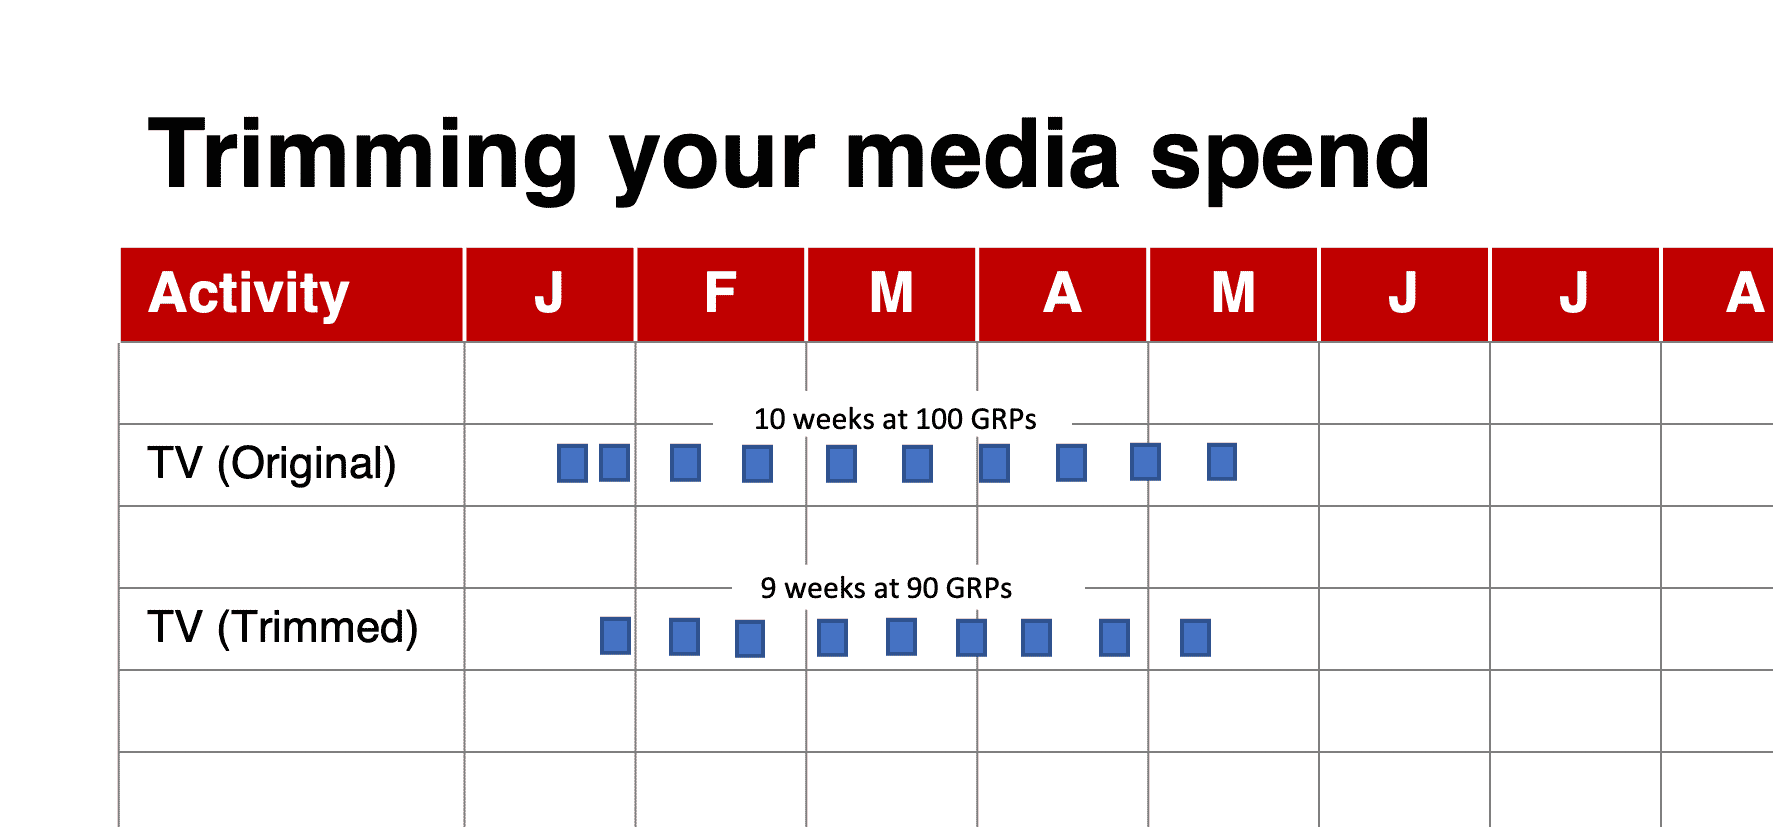 Trimming your media spend